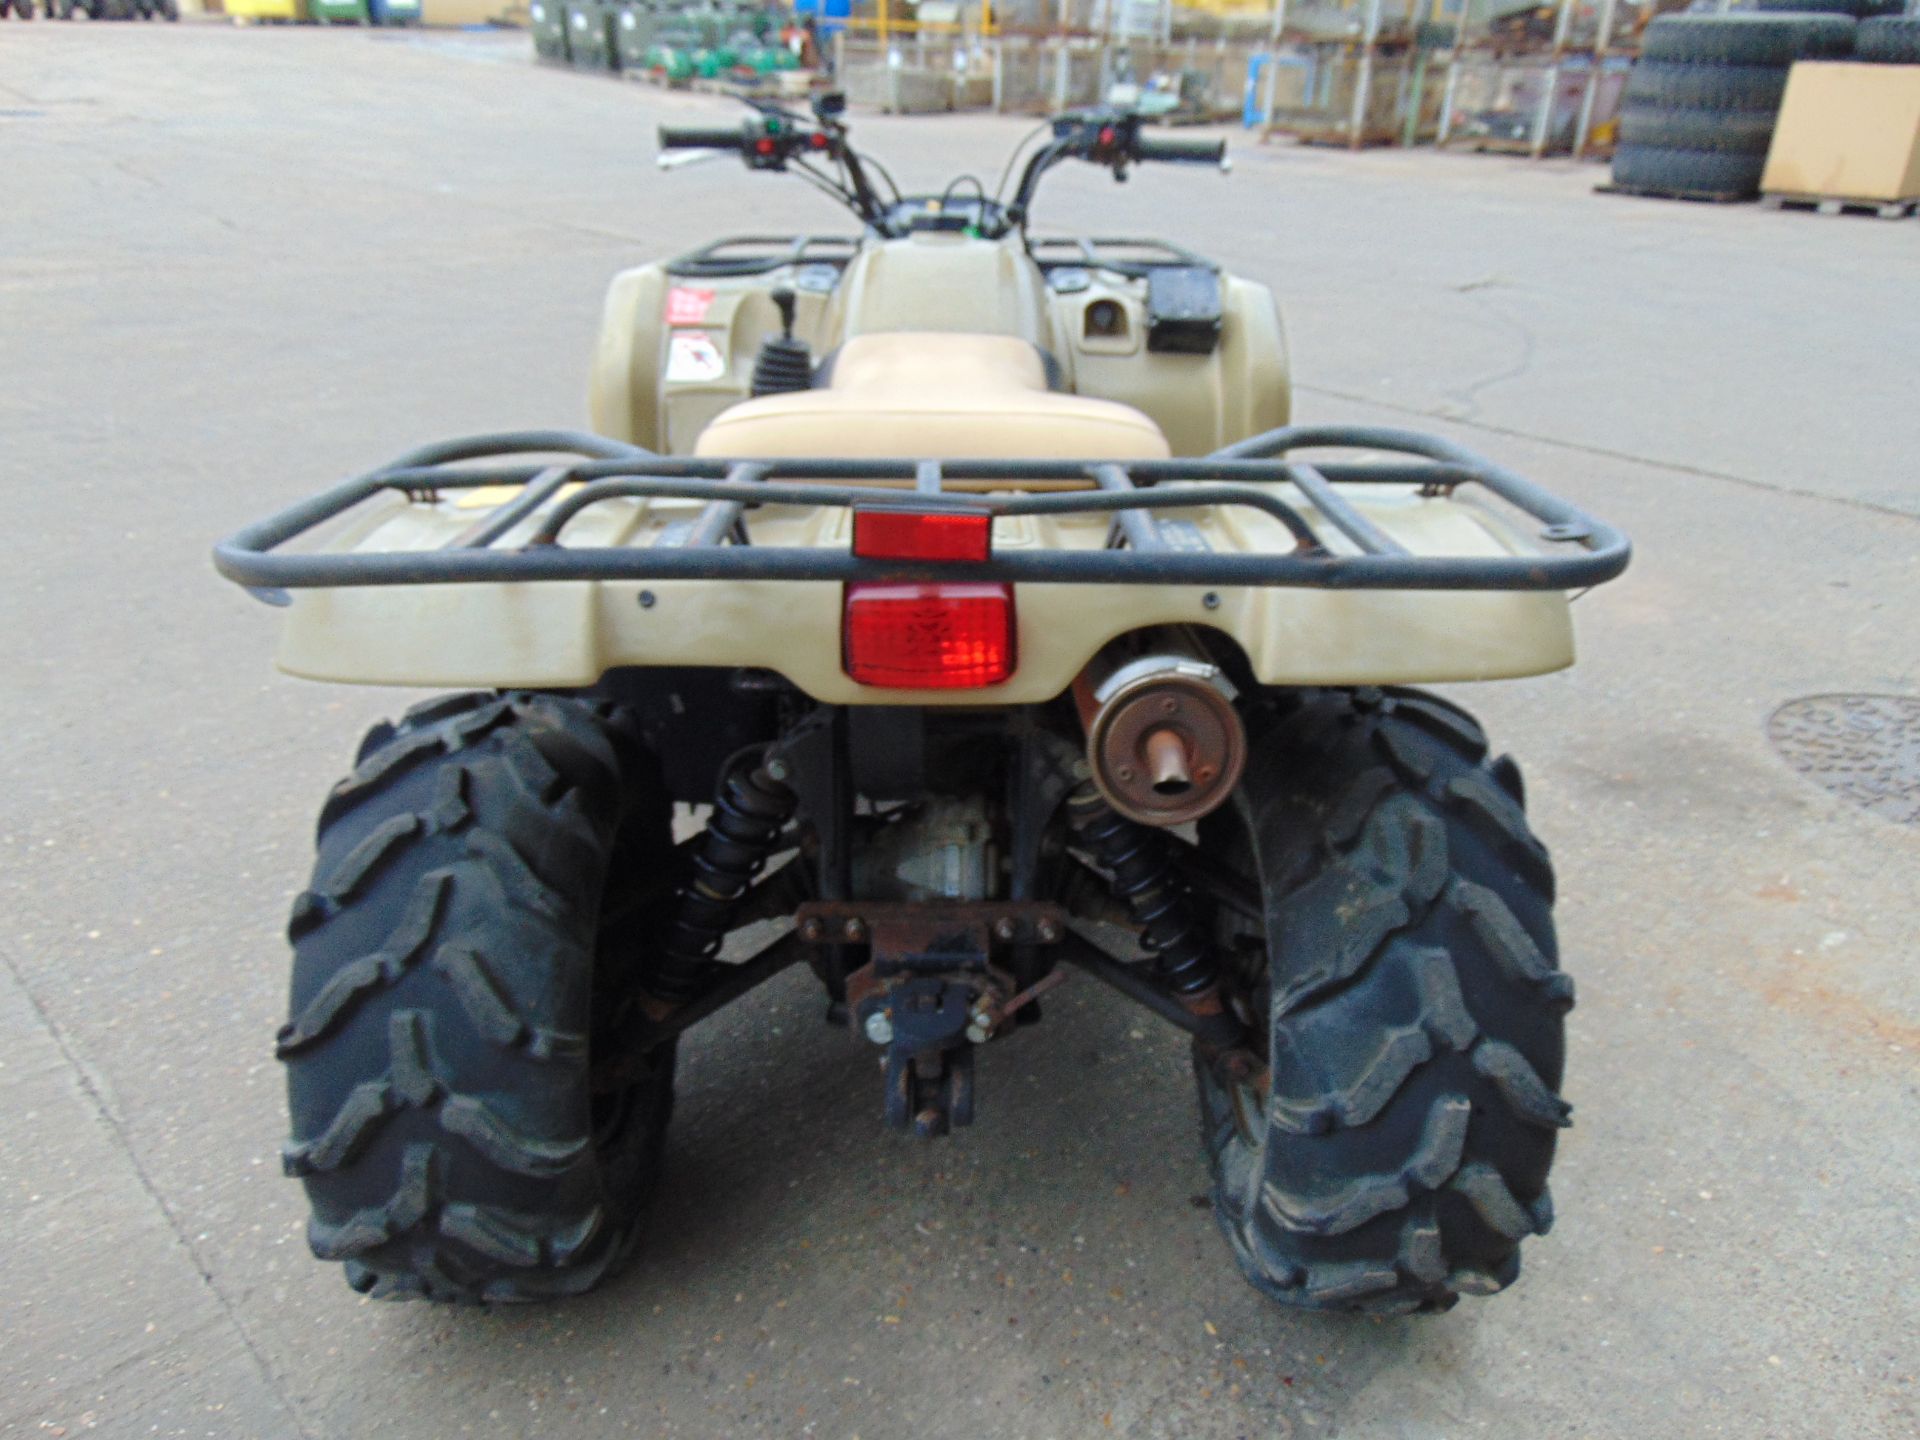 Recent Release Military Specification Yamaha Grizzly 450 4 x 4 ATV Quad Bike ONLY 59 HOURS!!! - Image 8 of 20